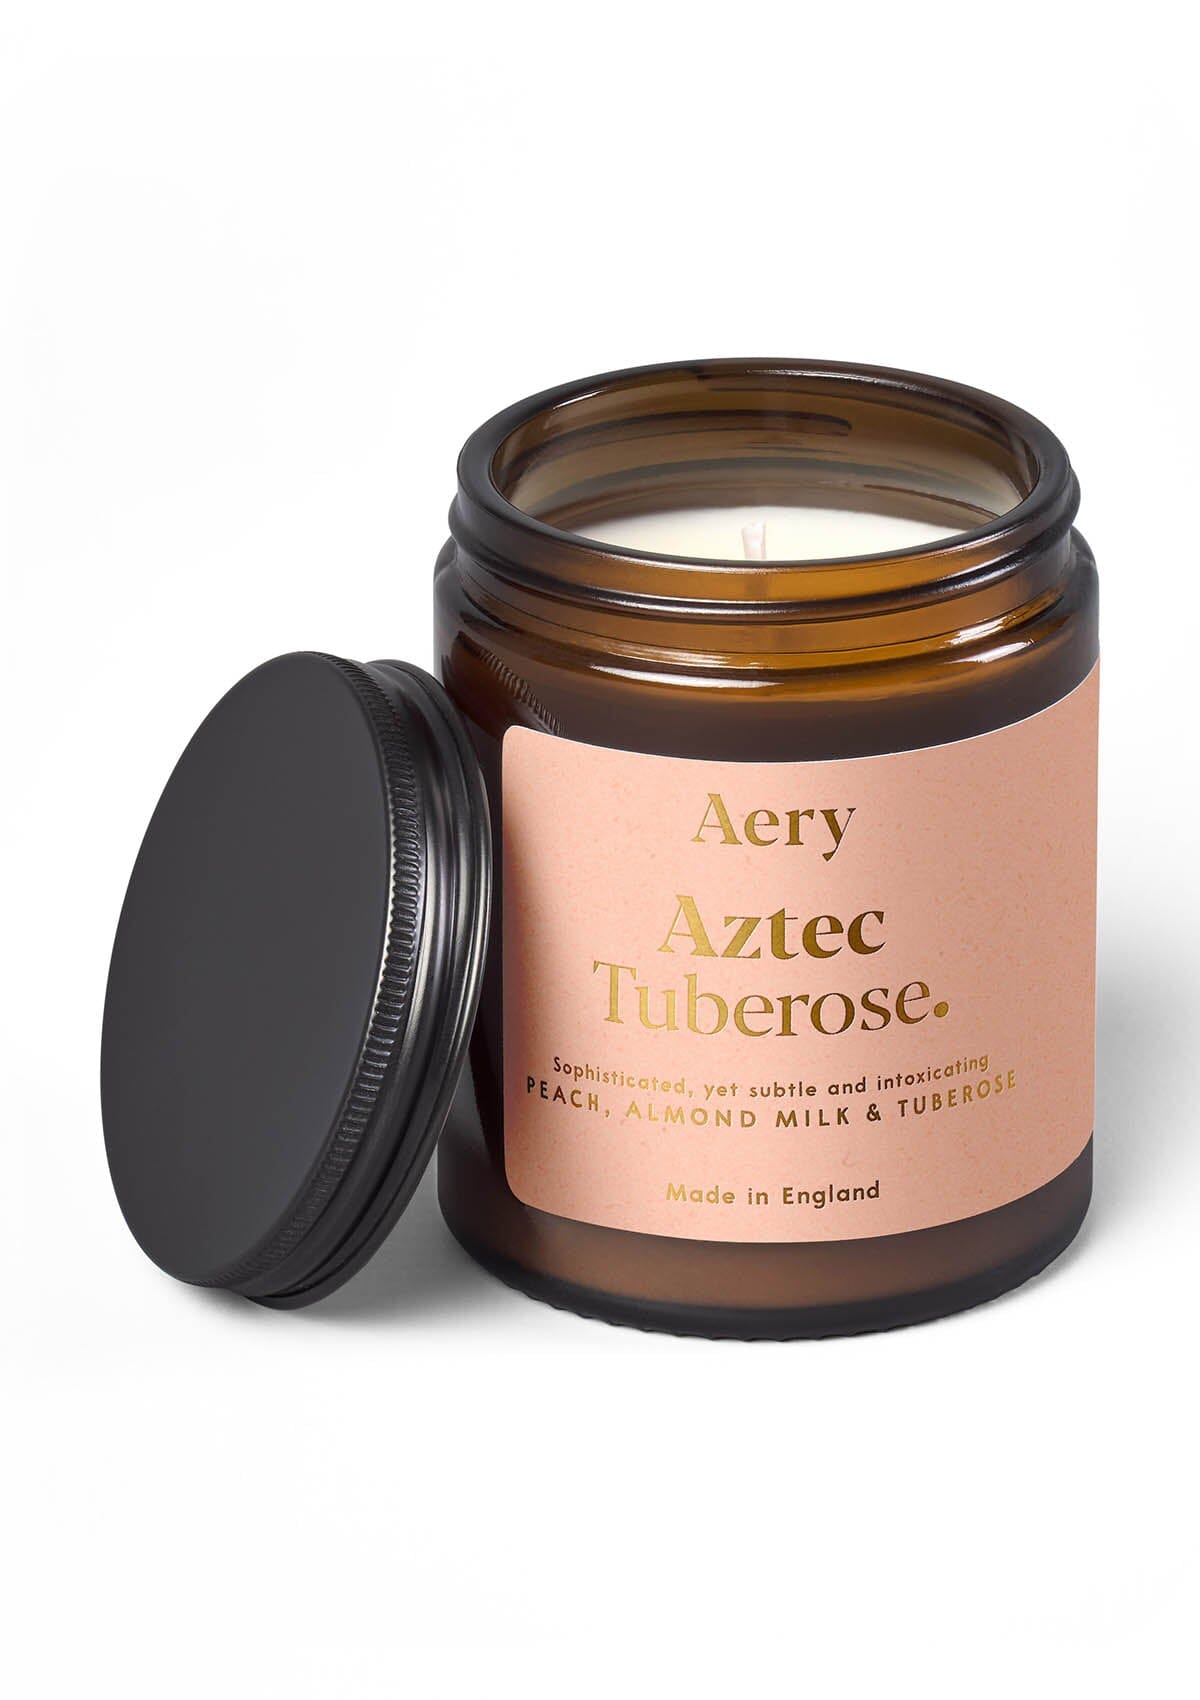 Peach Aztec Tuberose jar candle by Aery displayed on white background